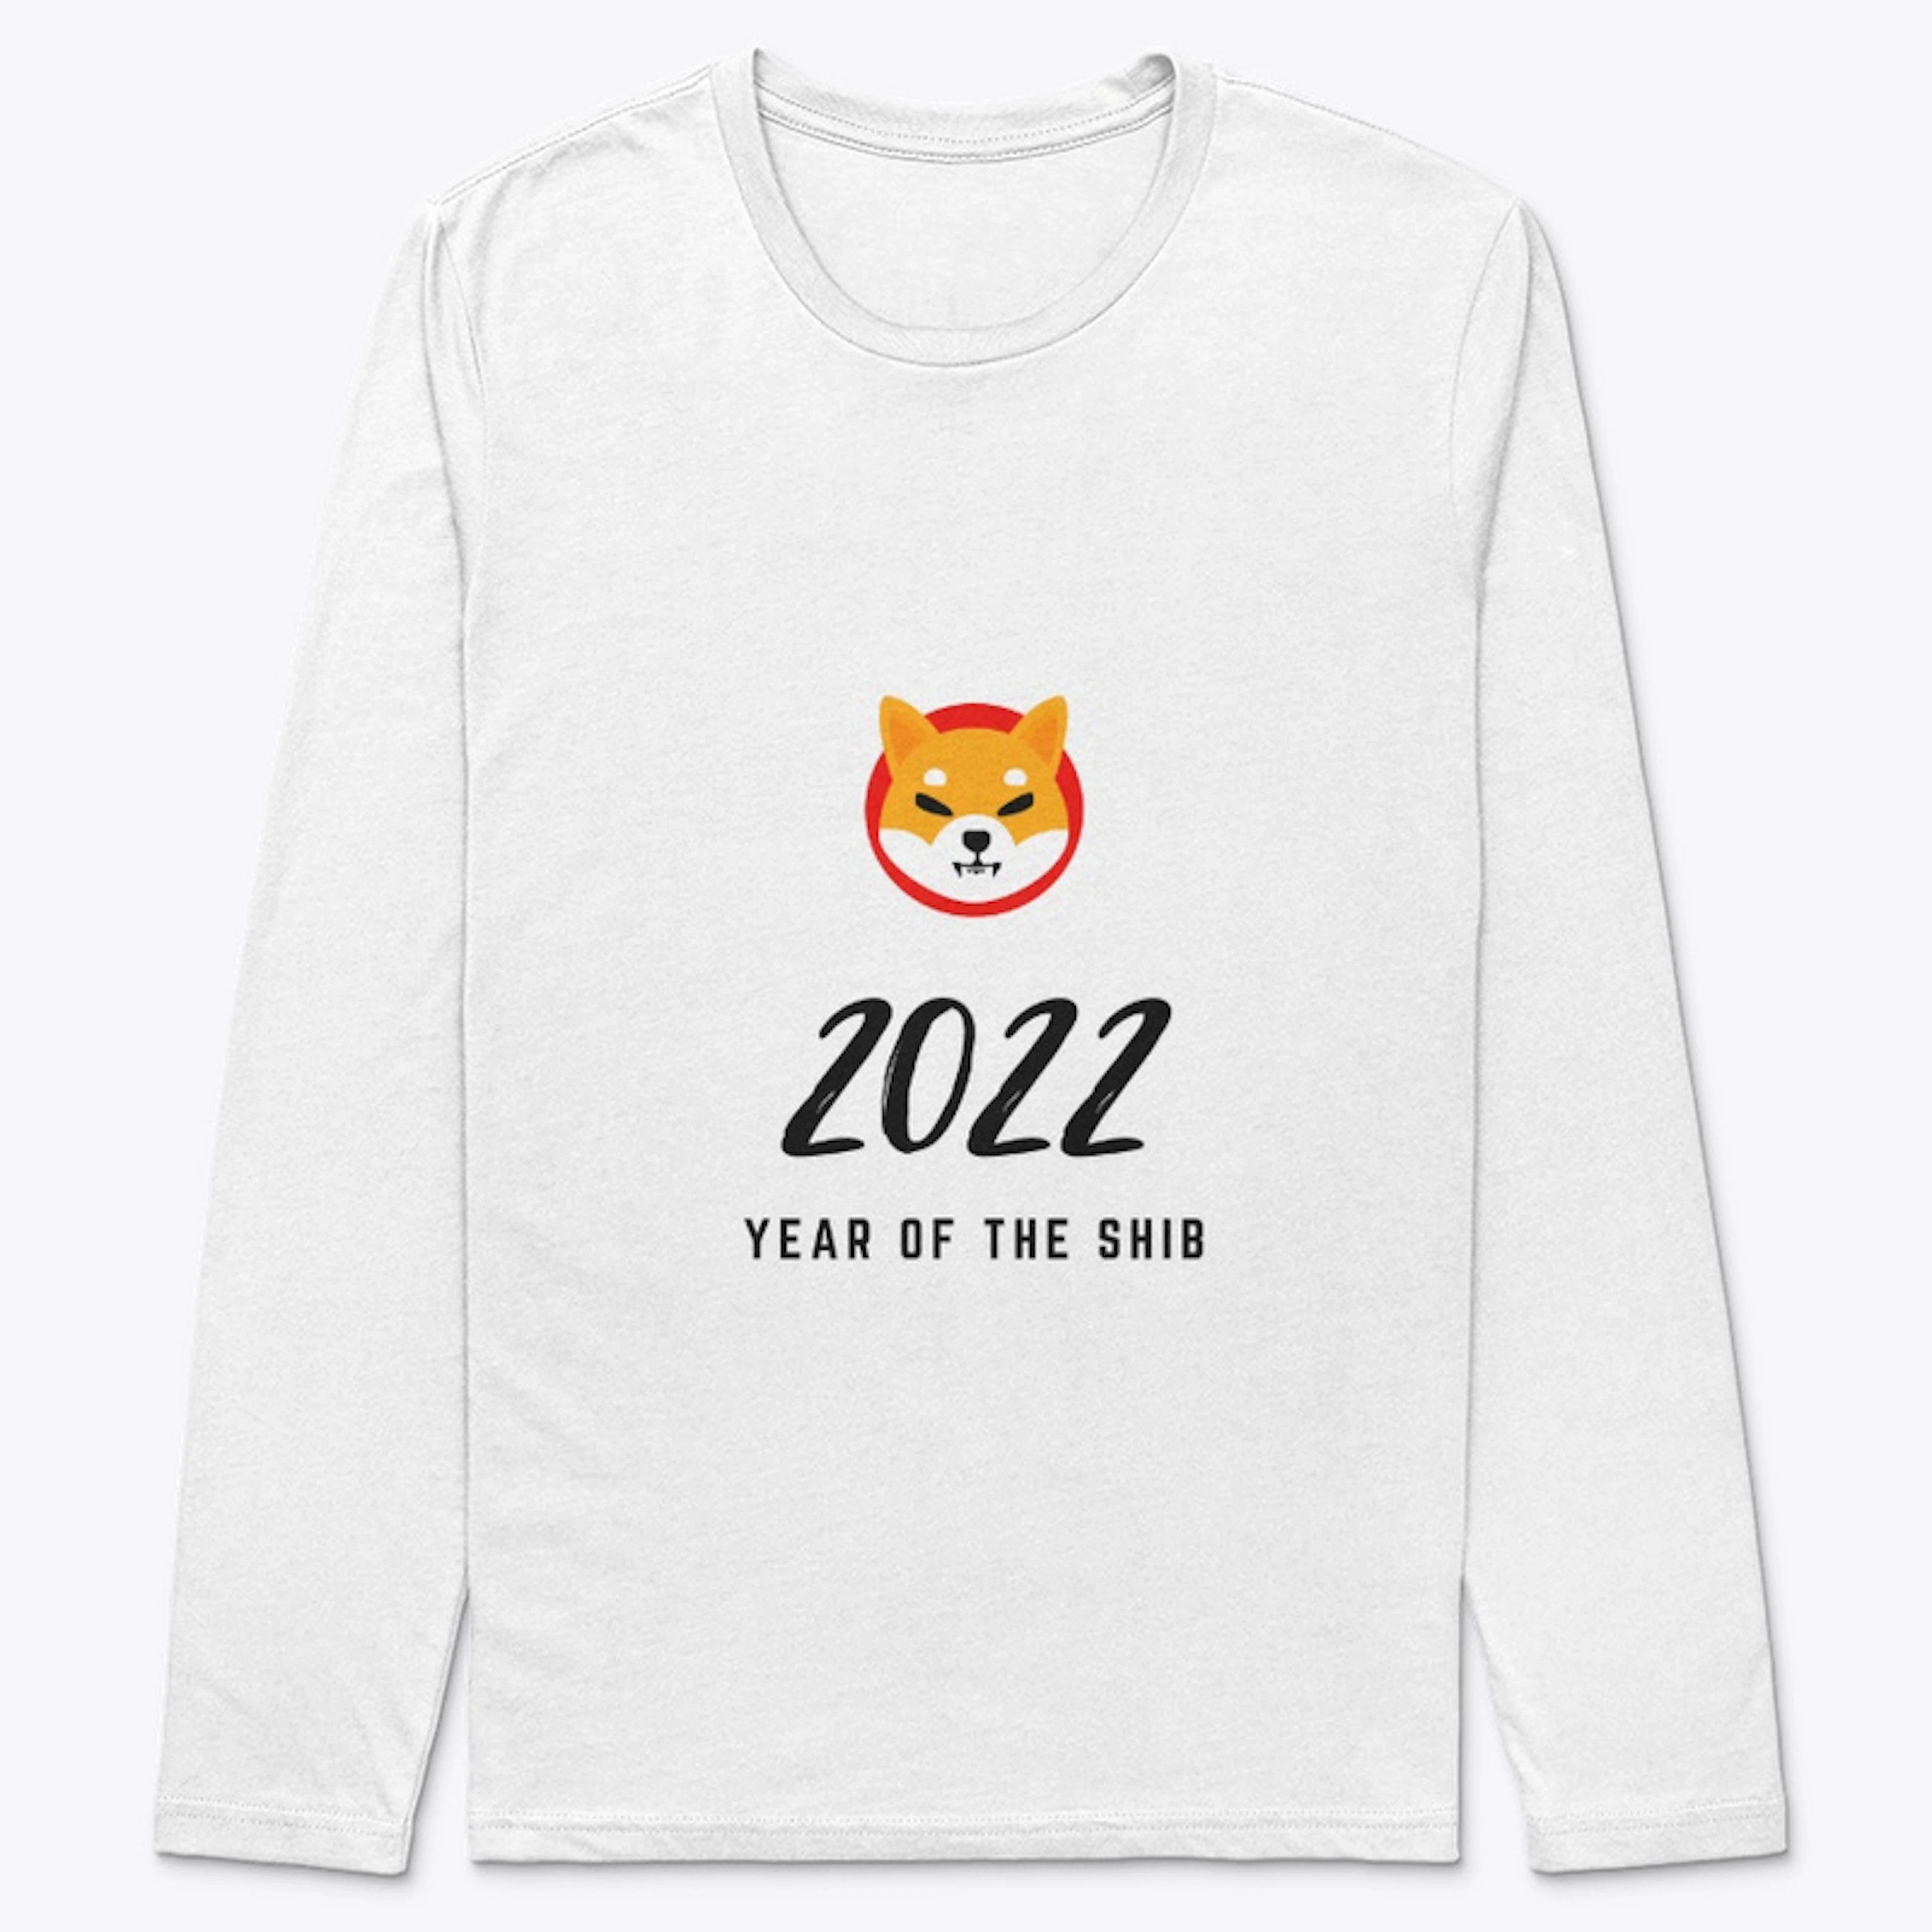 Year of the SHIB